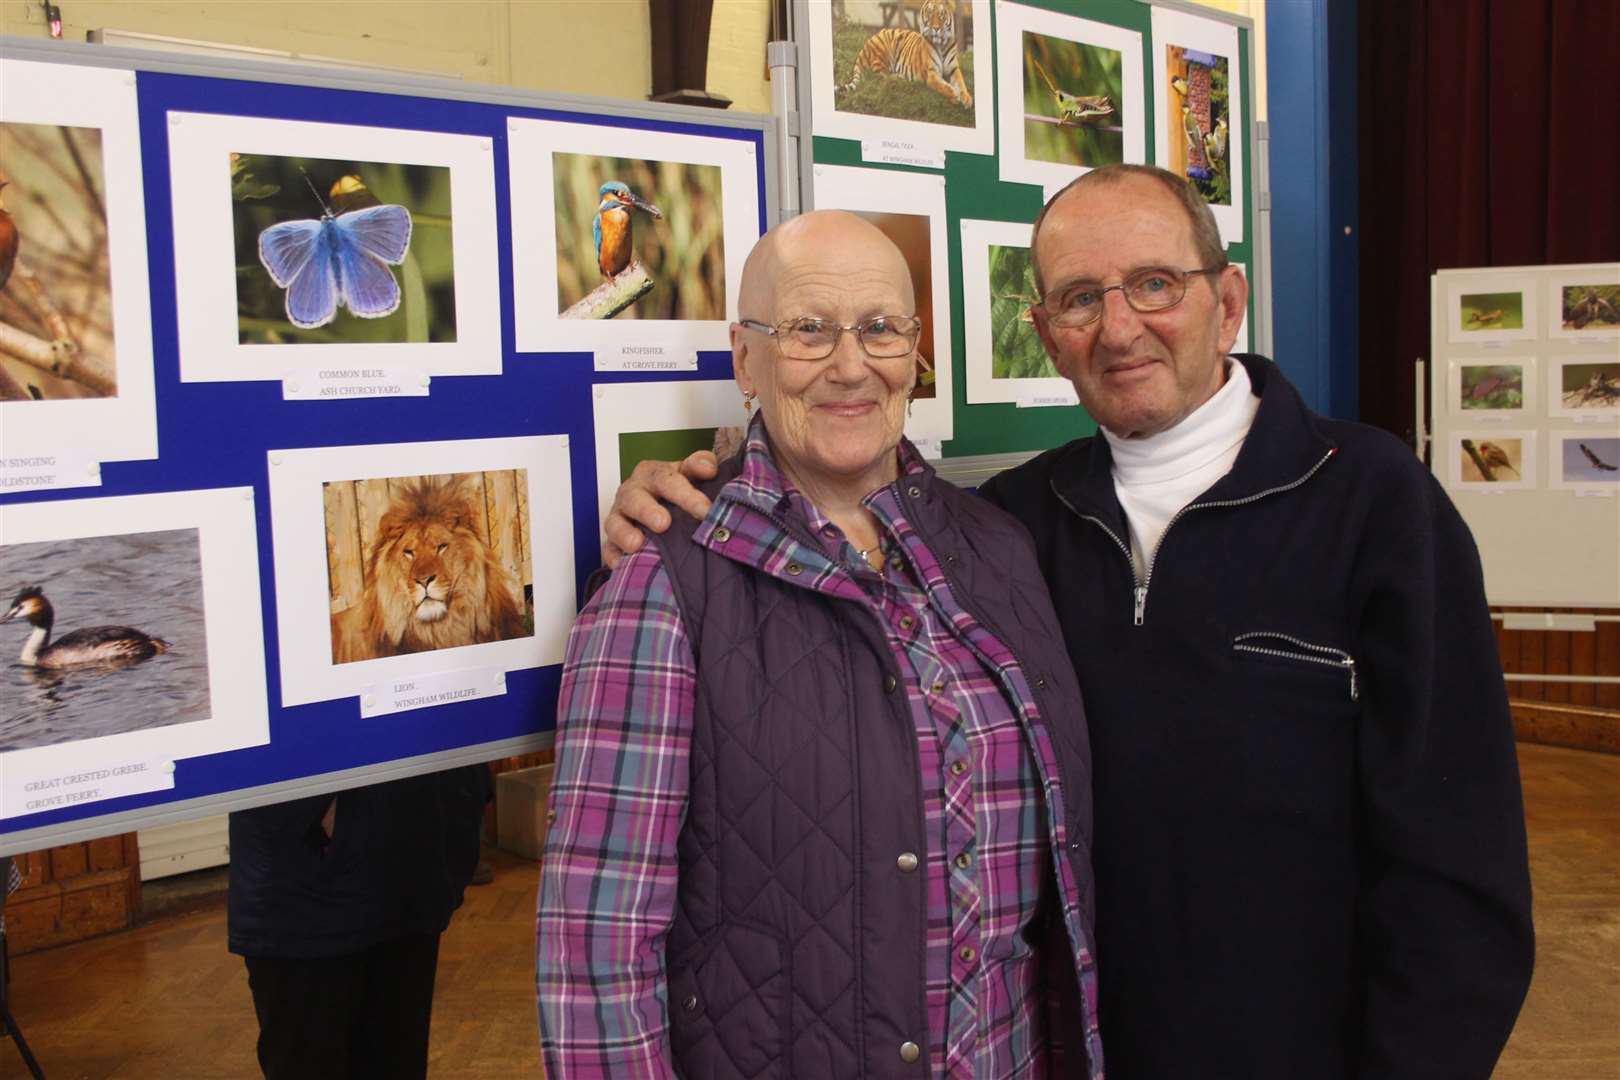 Sheila and Bob Paige who raised money for Age Concern in Sandwich via sales of their wildlife calendar will switch on Sandwich's lights